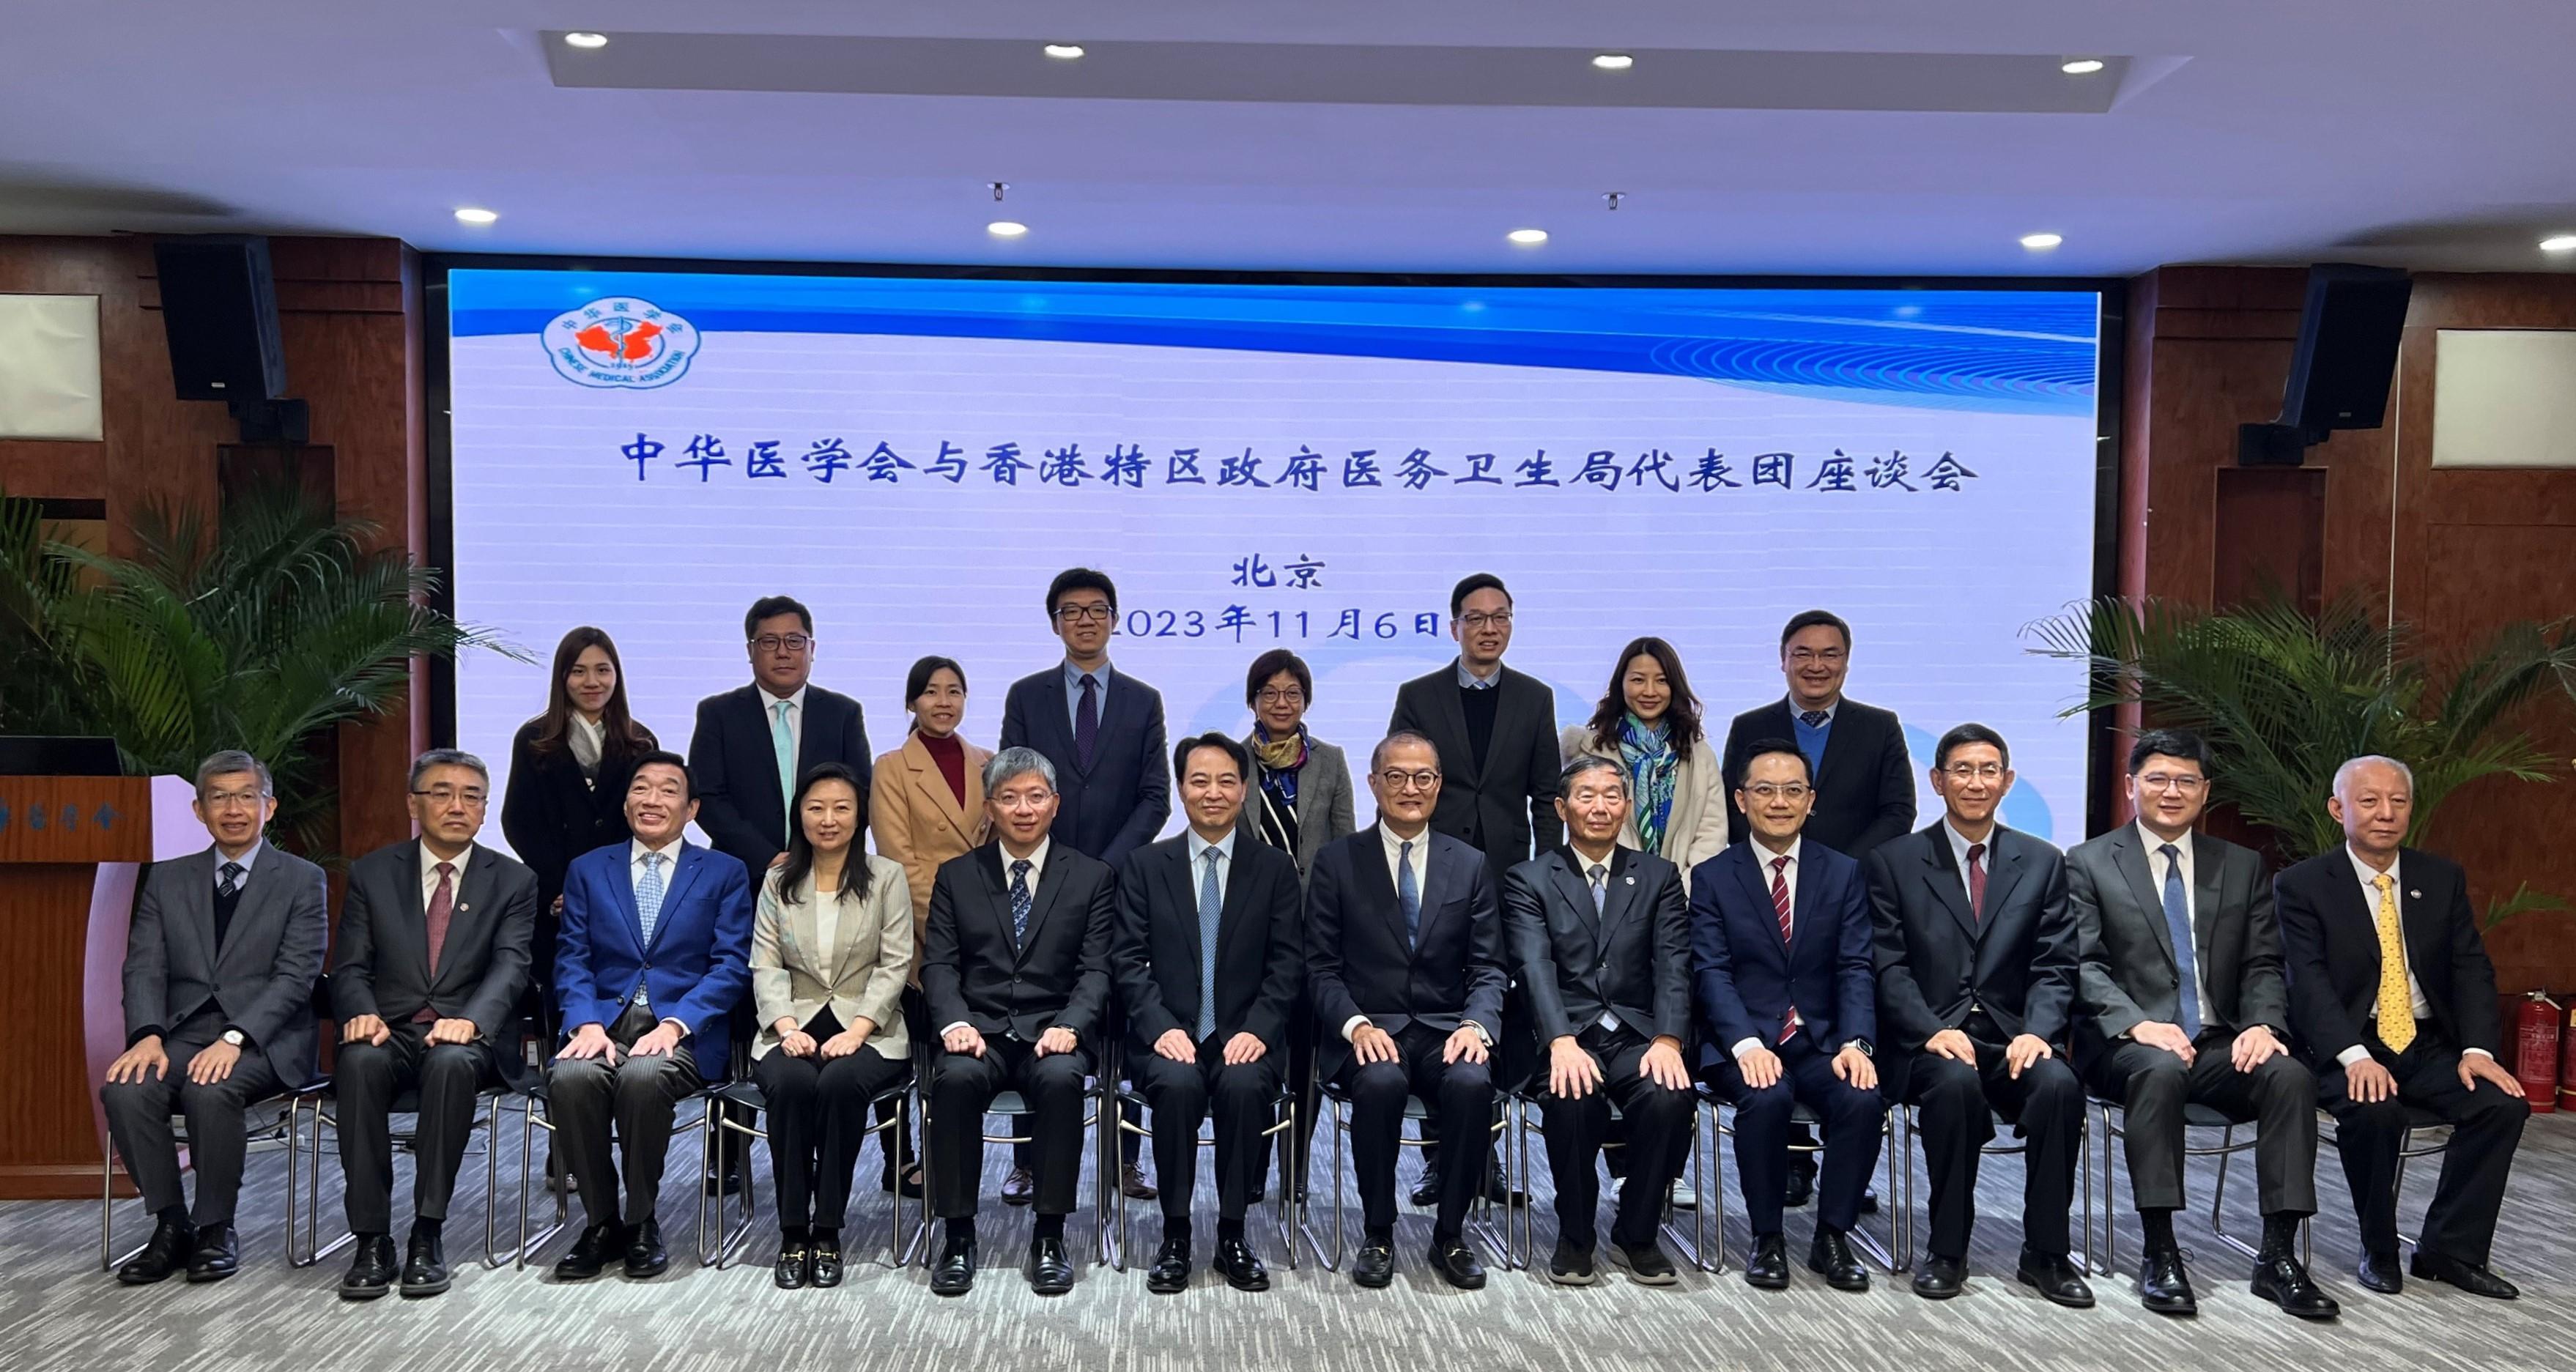 The Secretary for Health, Professor Lo Chung-mau, and his delegation met with the representatives of the Chinese Medical Association in Beijing this afternoon (November 6). Photo shows Professor Lo (front row, sixth right); the President of the Chinese Medical Association, Mr Zhao Yupei (front row, sixth left); the Permanent Secretary for Health, Mr Thomas Chan (front row, fifth left); the Director of Health, Dr Ronald Lam (front row, fourth right); the Chairman of the Hospital Authority (HA), Mr Henry Fan (front row, third left); and the Chief Executive of the HA, Dr Tony Ko (front row, second right), and other attendees of the meeting.